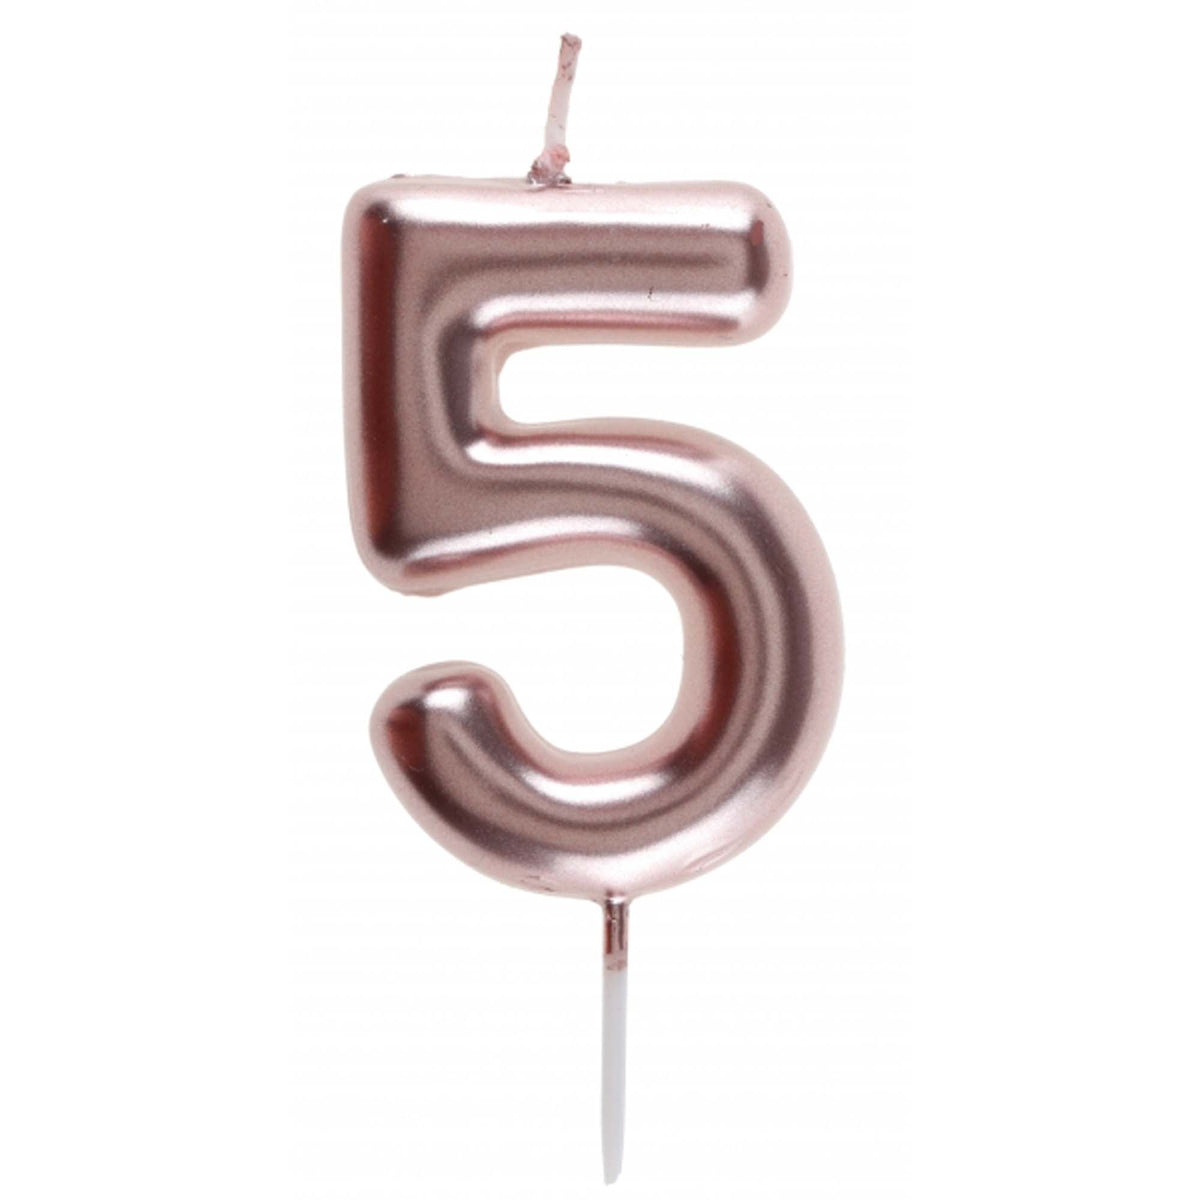 SANTEX Cake Supplies Rose Gold Number 5 Birthday Candle, 1 Count 3660380068822